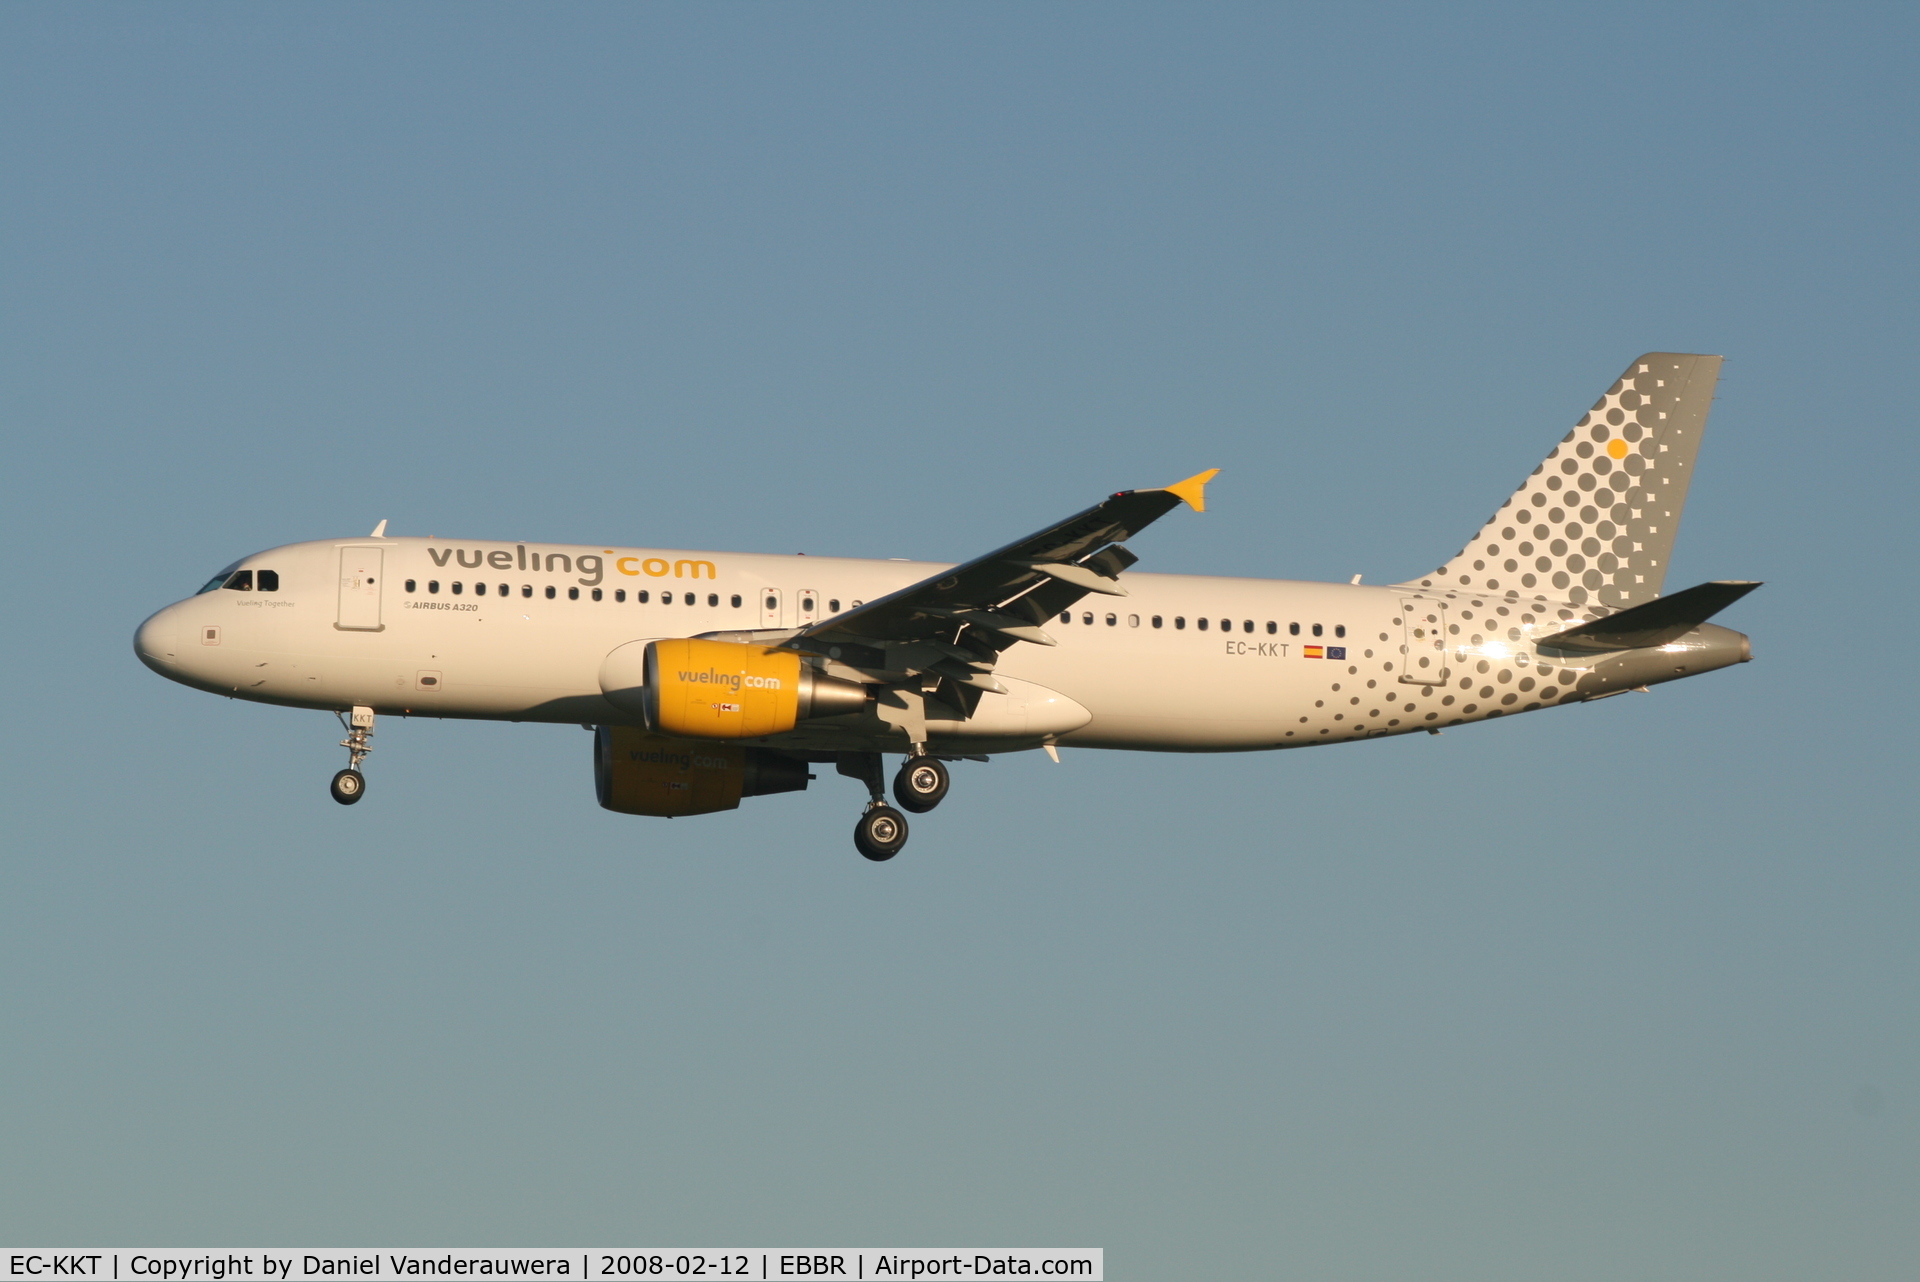 EC-KKT, 2007 Airbus A320-214 C/N 3293, arrival of flight VY5210 to rwy 25L